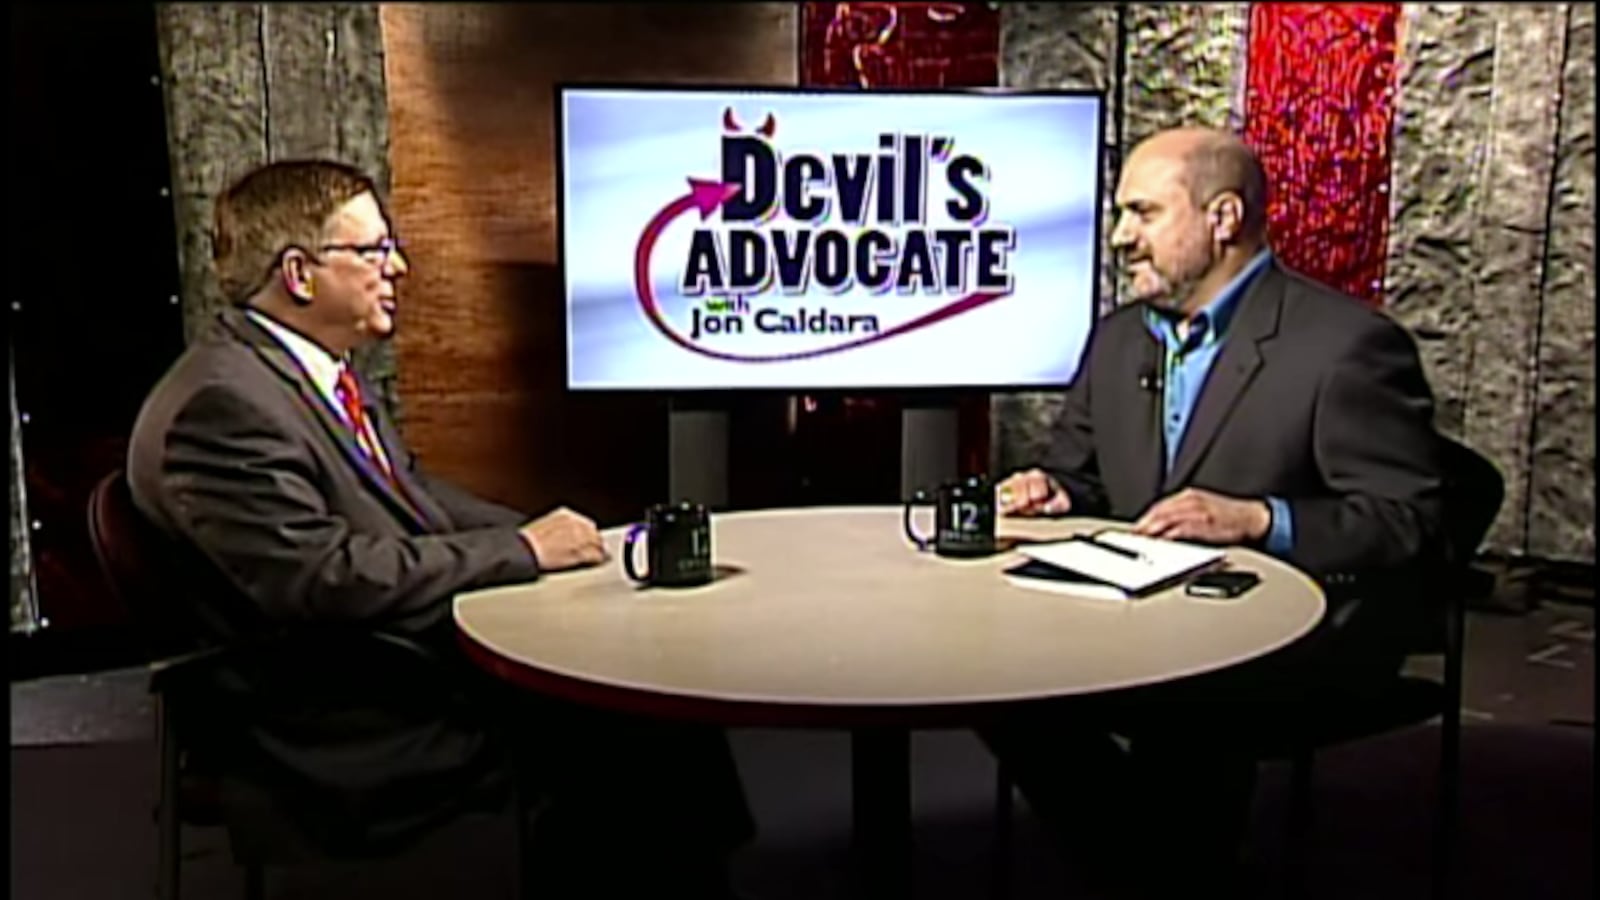 Jon Caldara, president of the Independence Institute, interviewed Jefferson County school board president and recall target Ken Witt, left, on his CPT12 television show "Devil's Advocate."